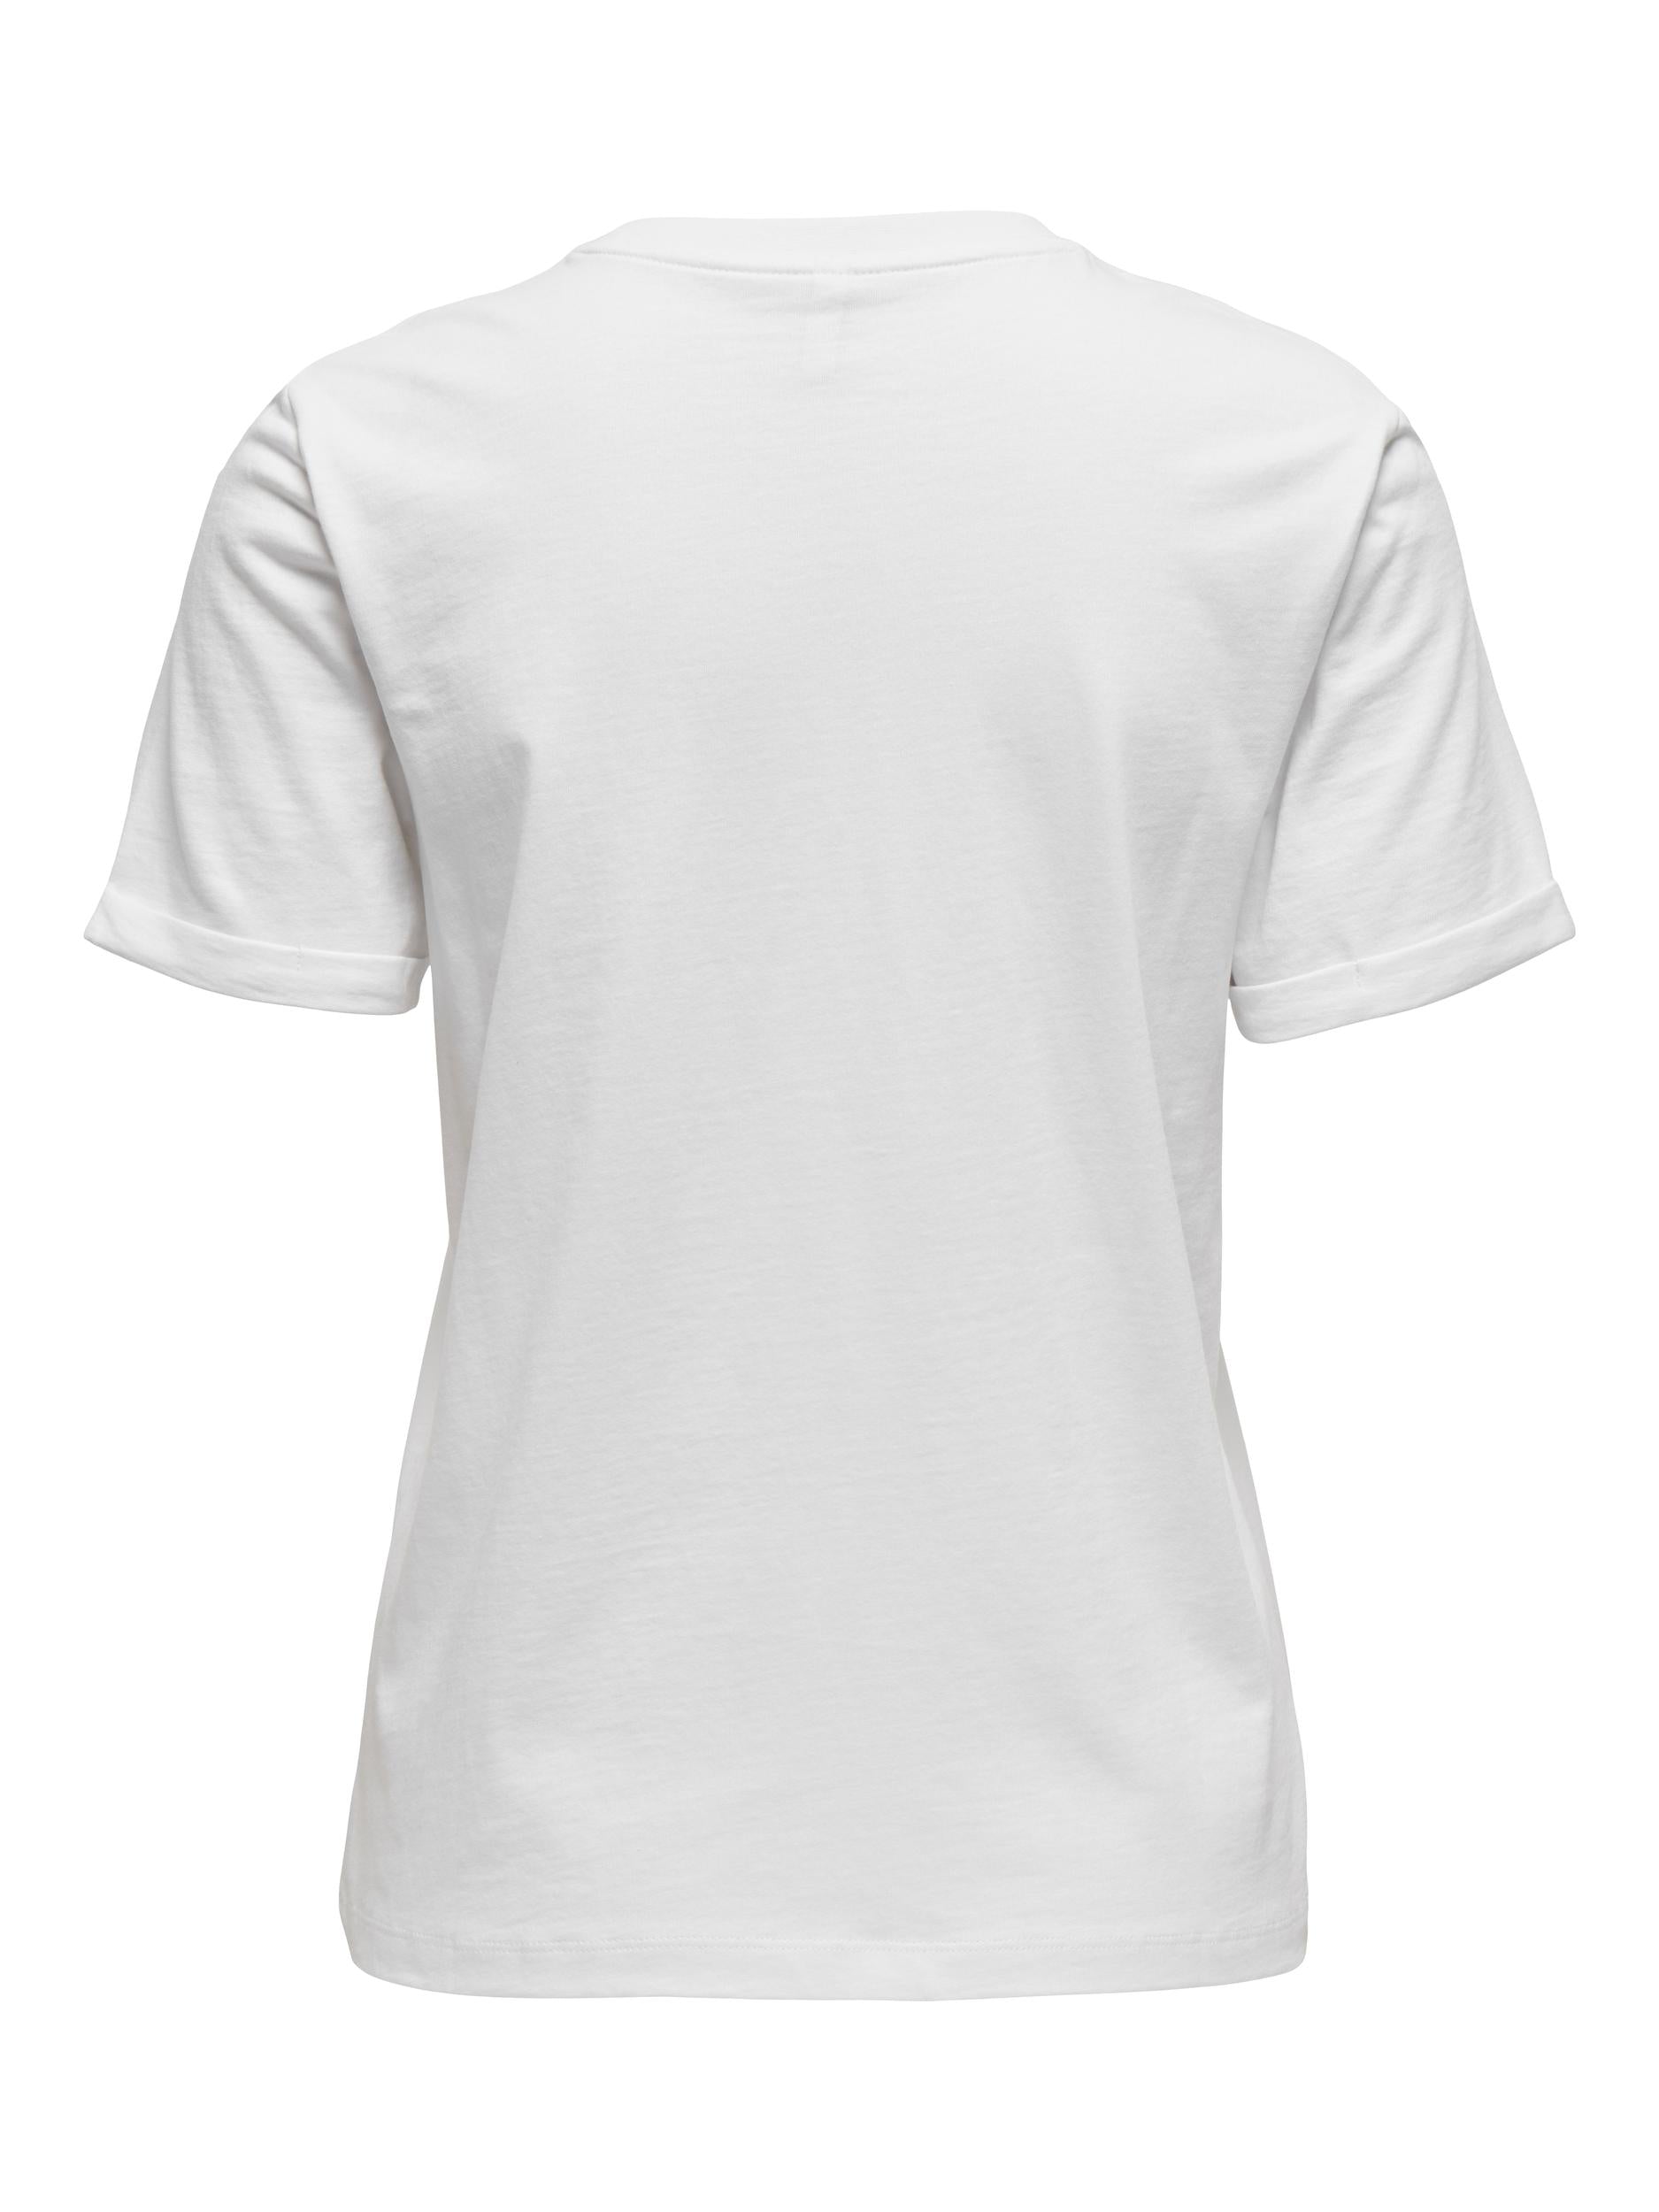 Ladies West Short Sleeve Bright White Tee-Back View